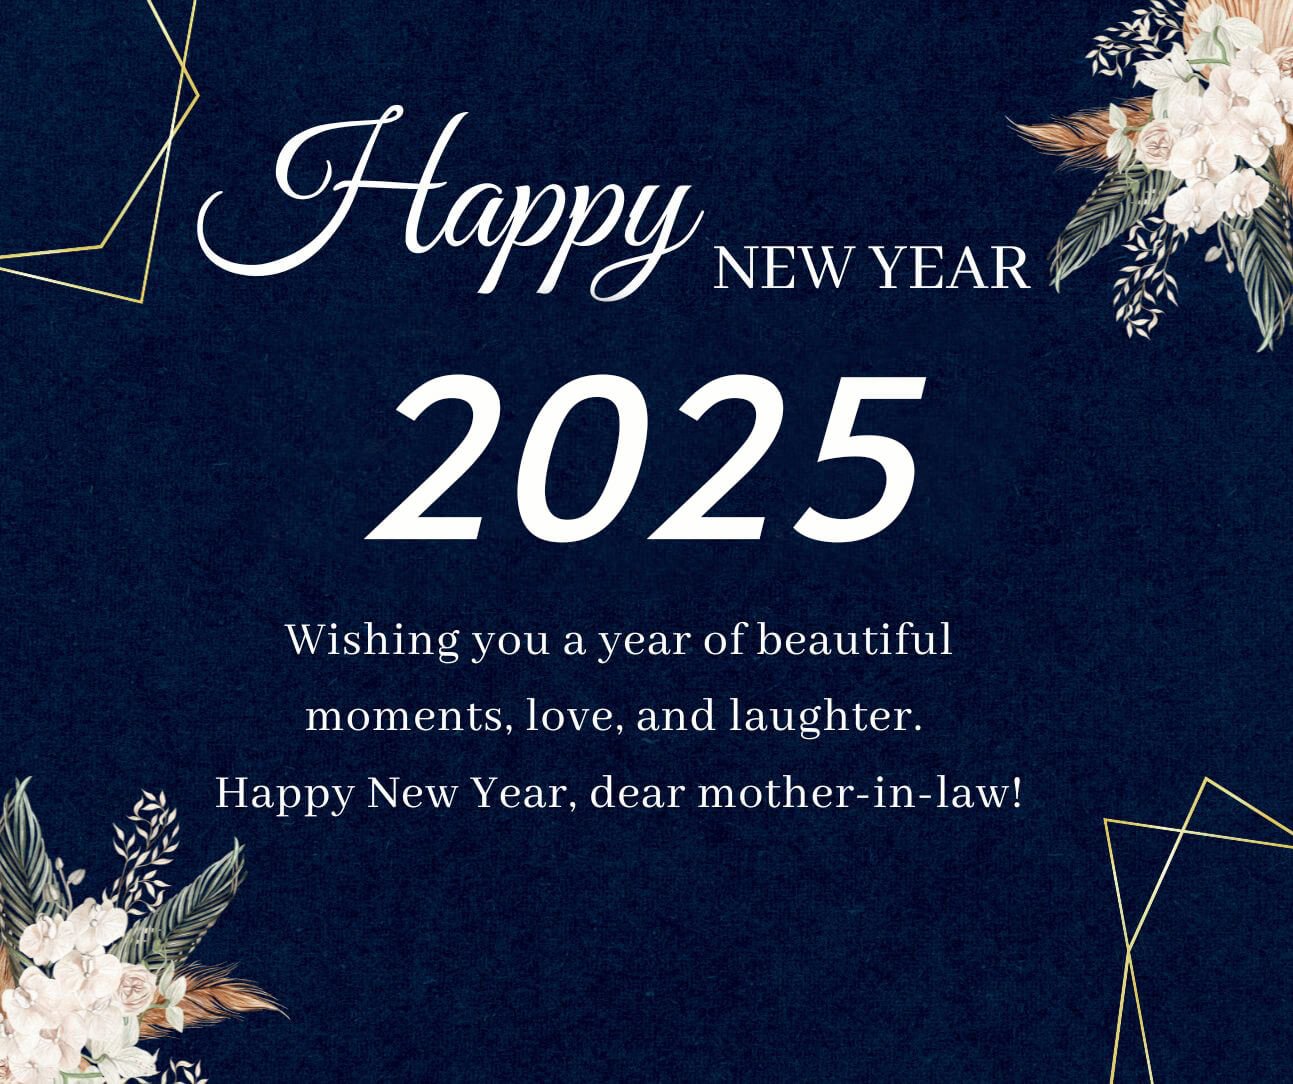 2025 Happy New Year Wishes For Mother In Law